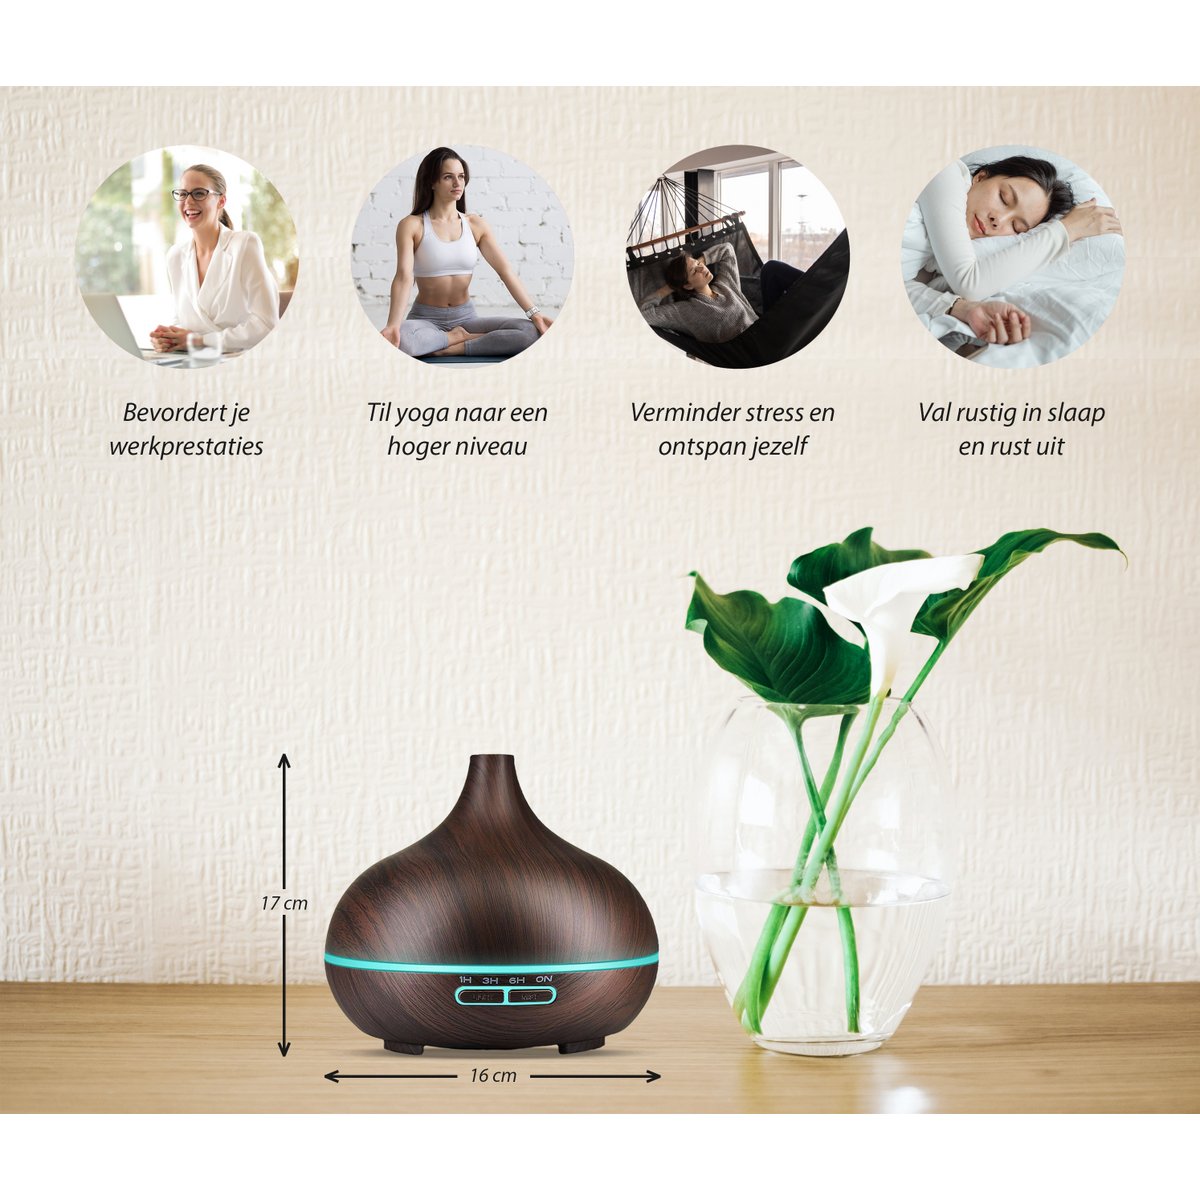 Diffuser 550ml - XL - Donker hout